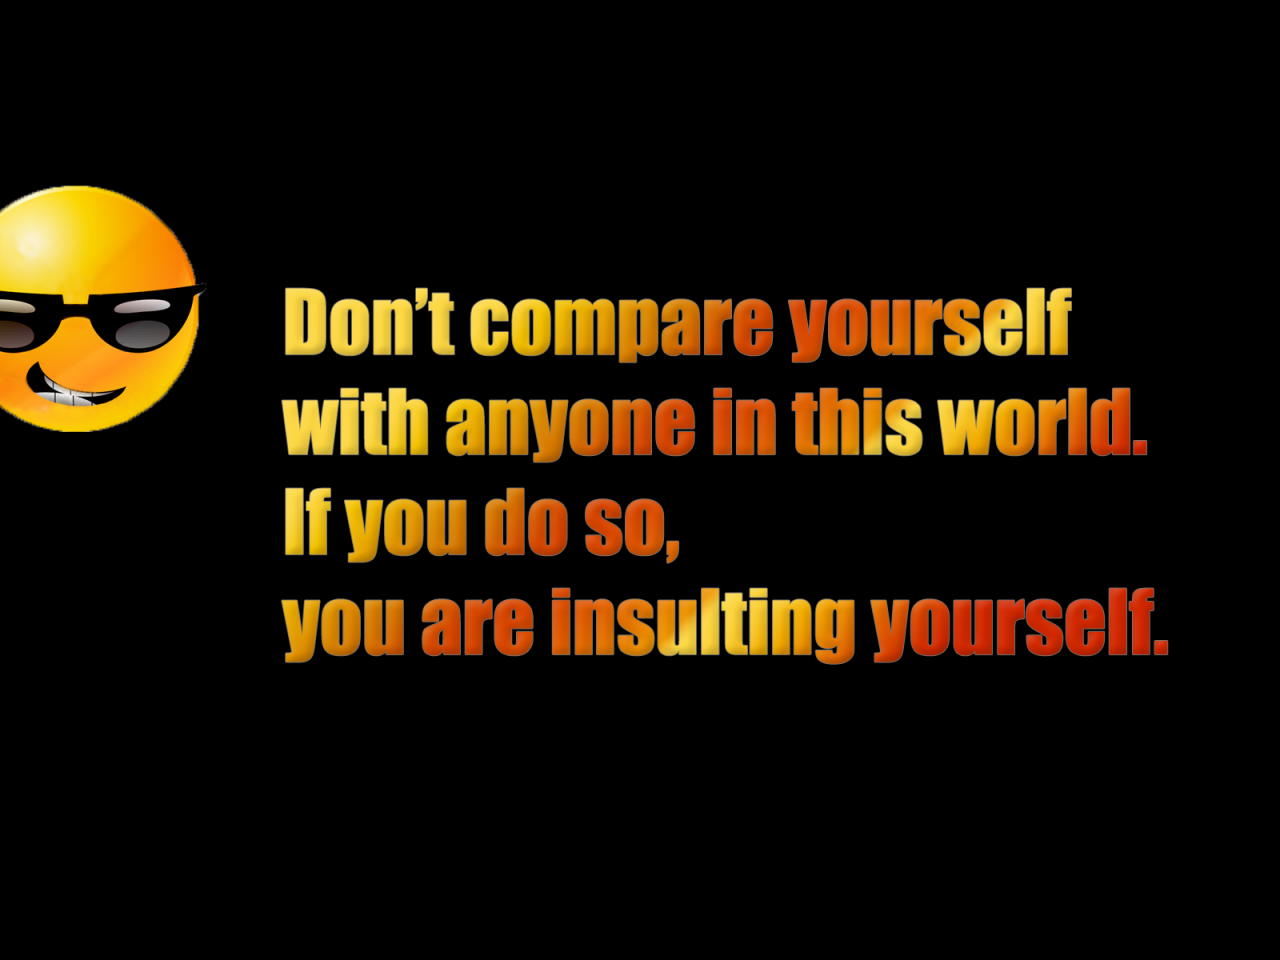 Compare yourself. Meaningful перевод. Meaningful Wallpaper.